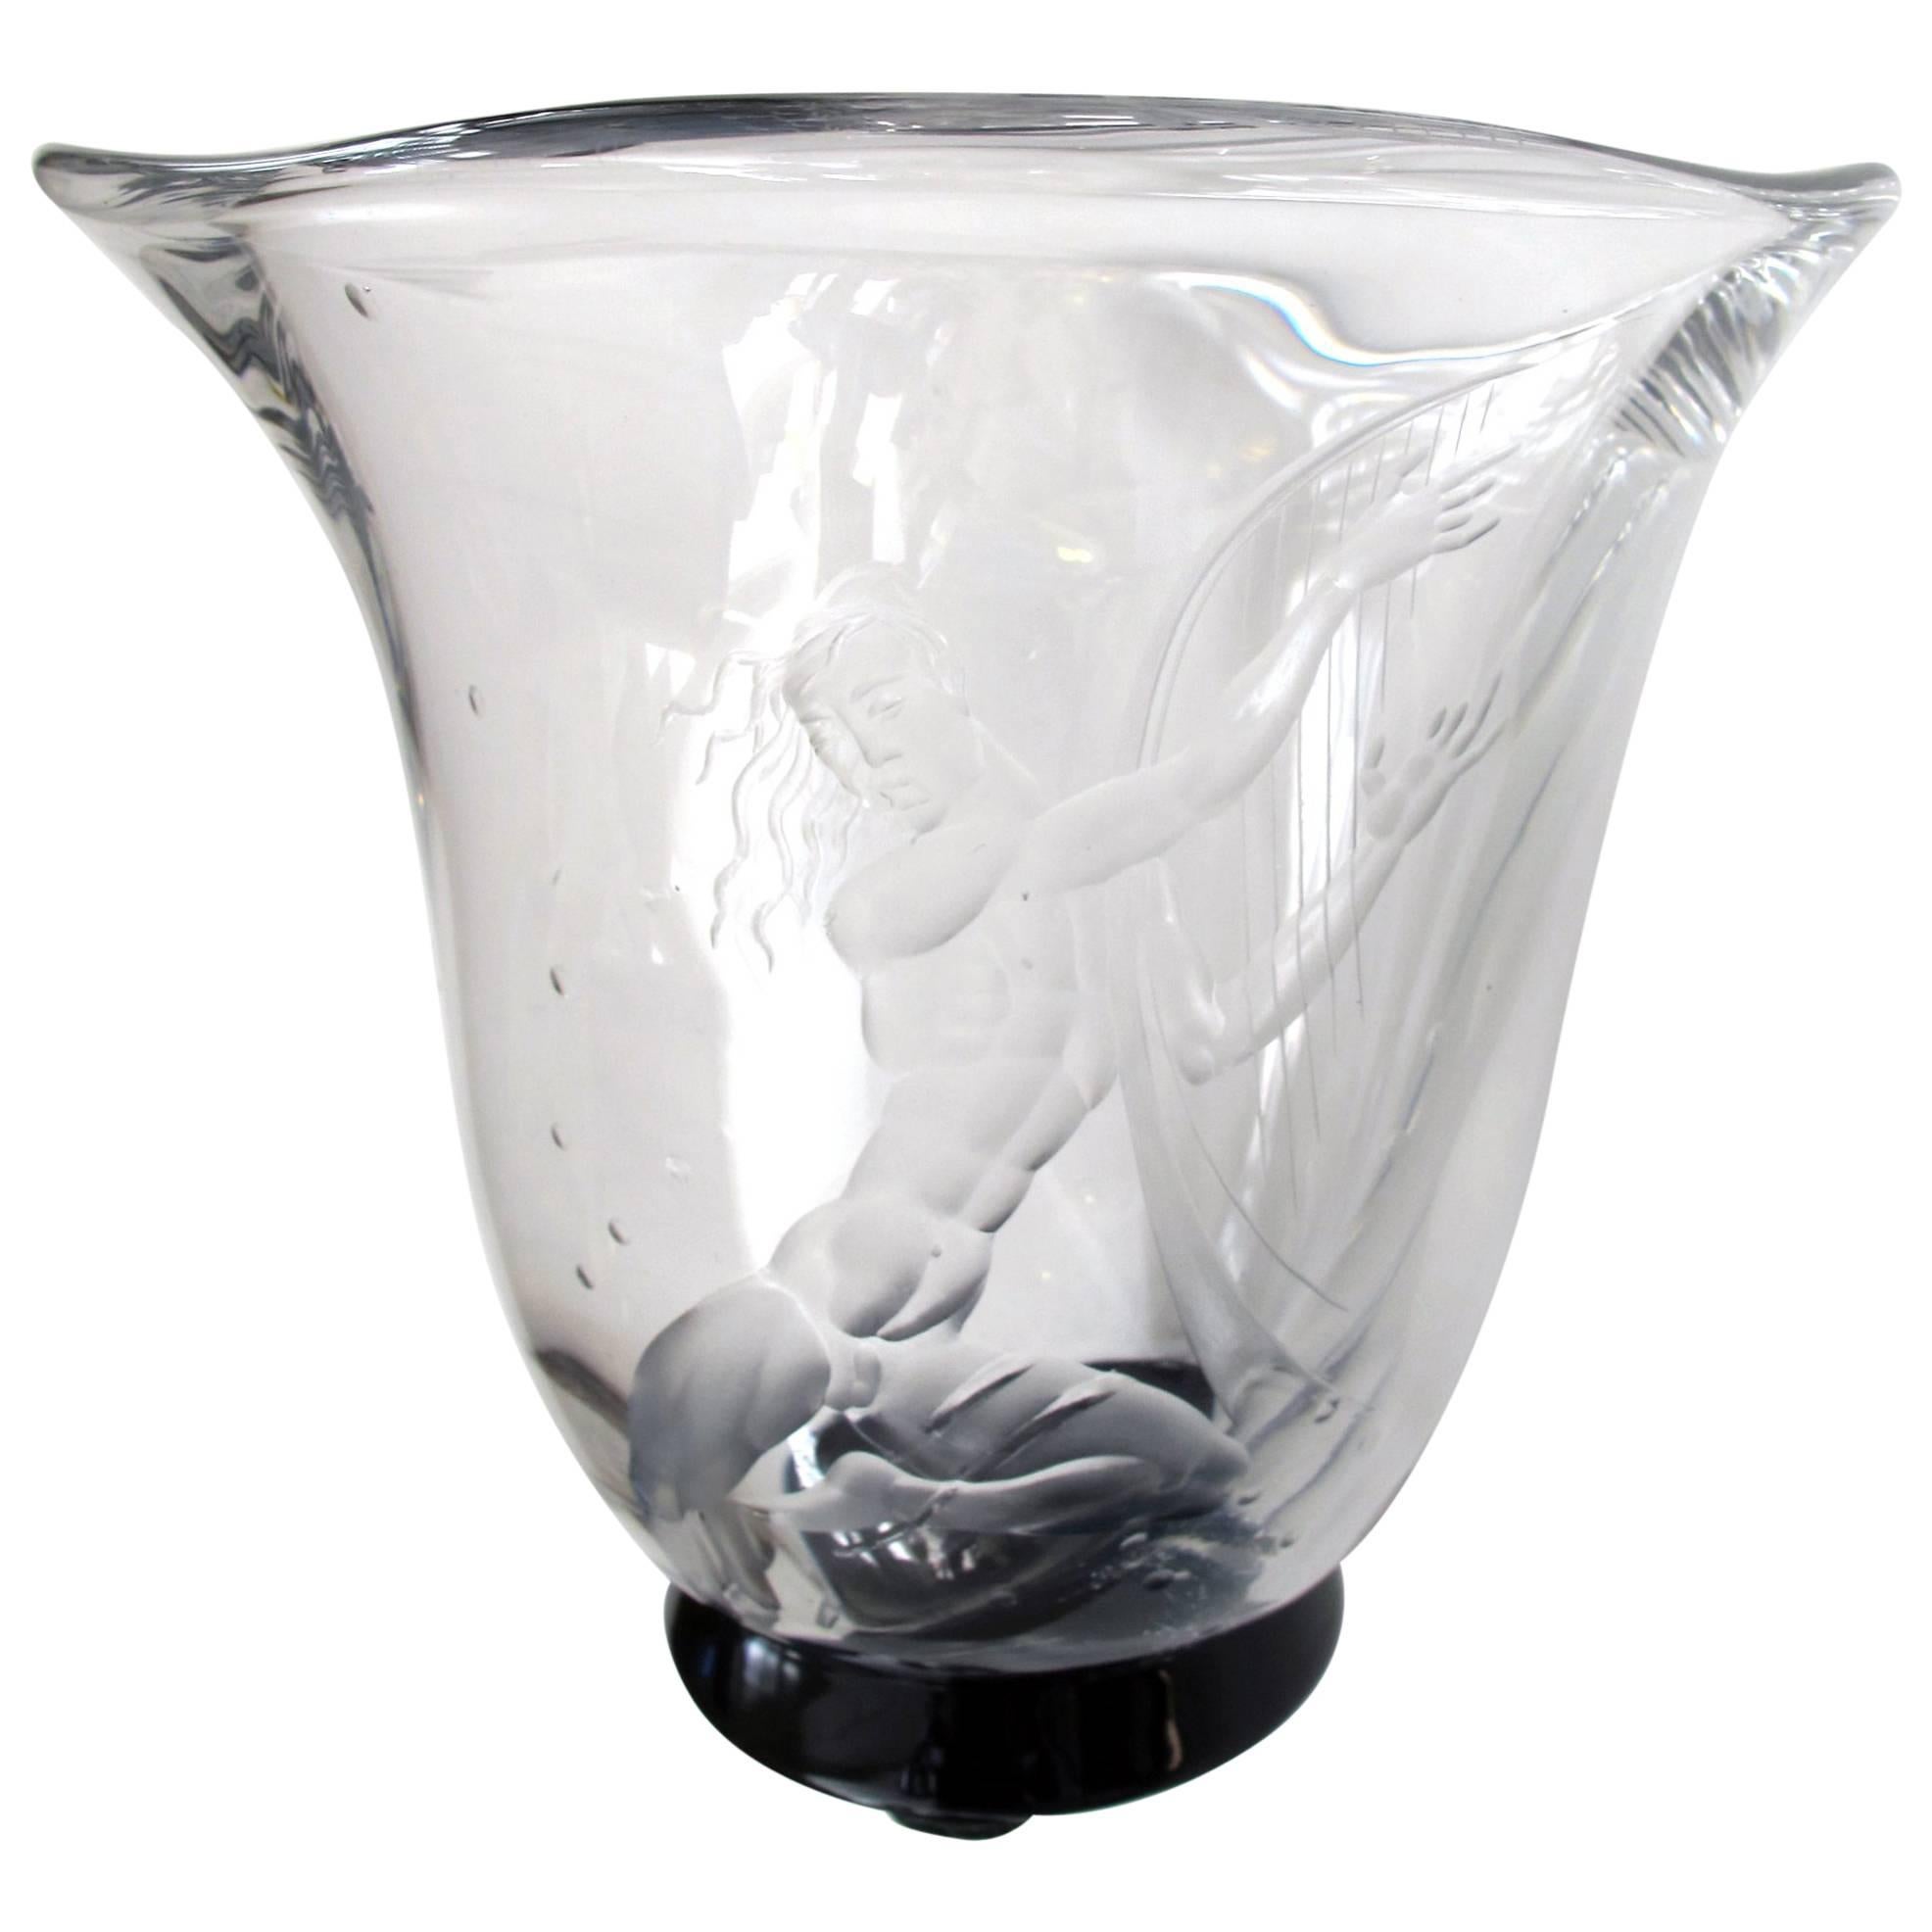 Good Quality Swedish Art Deco Etched Glass Vase by Simon Gate for Orrefors